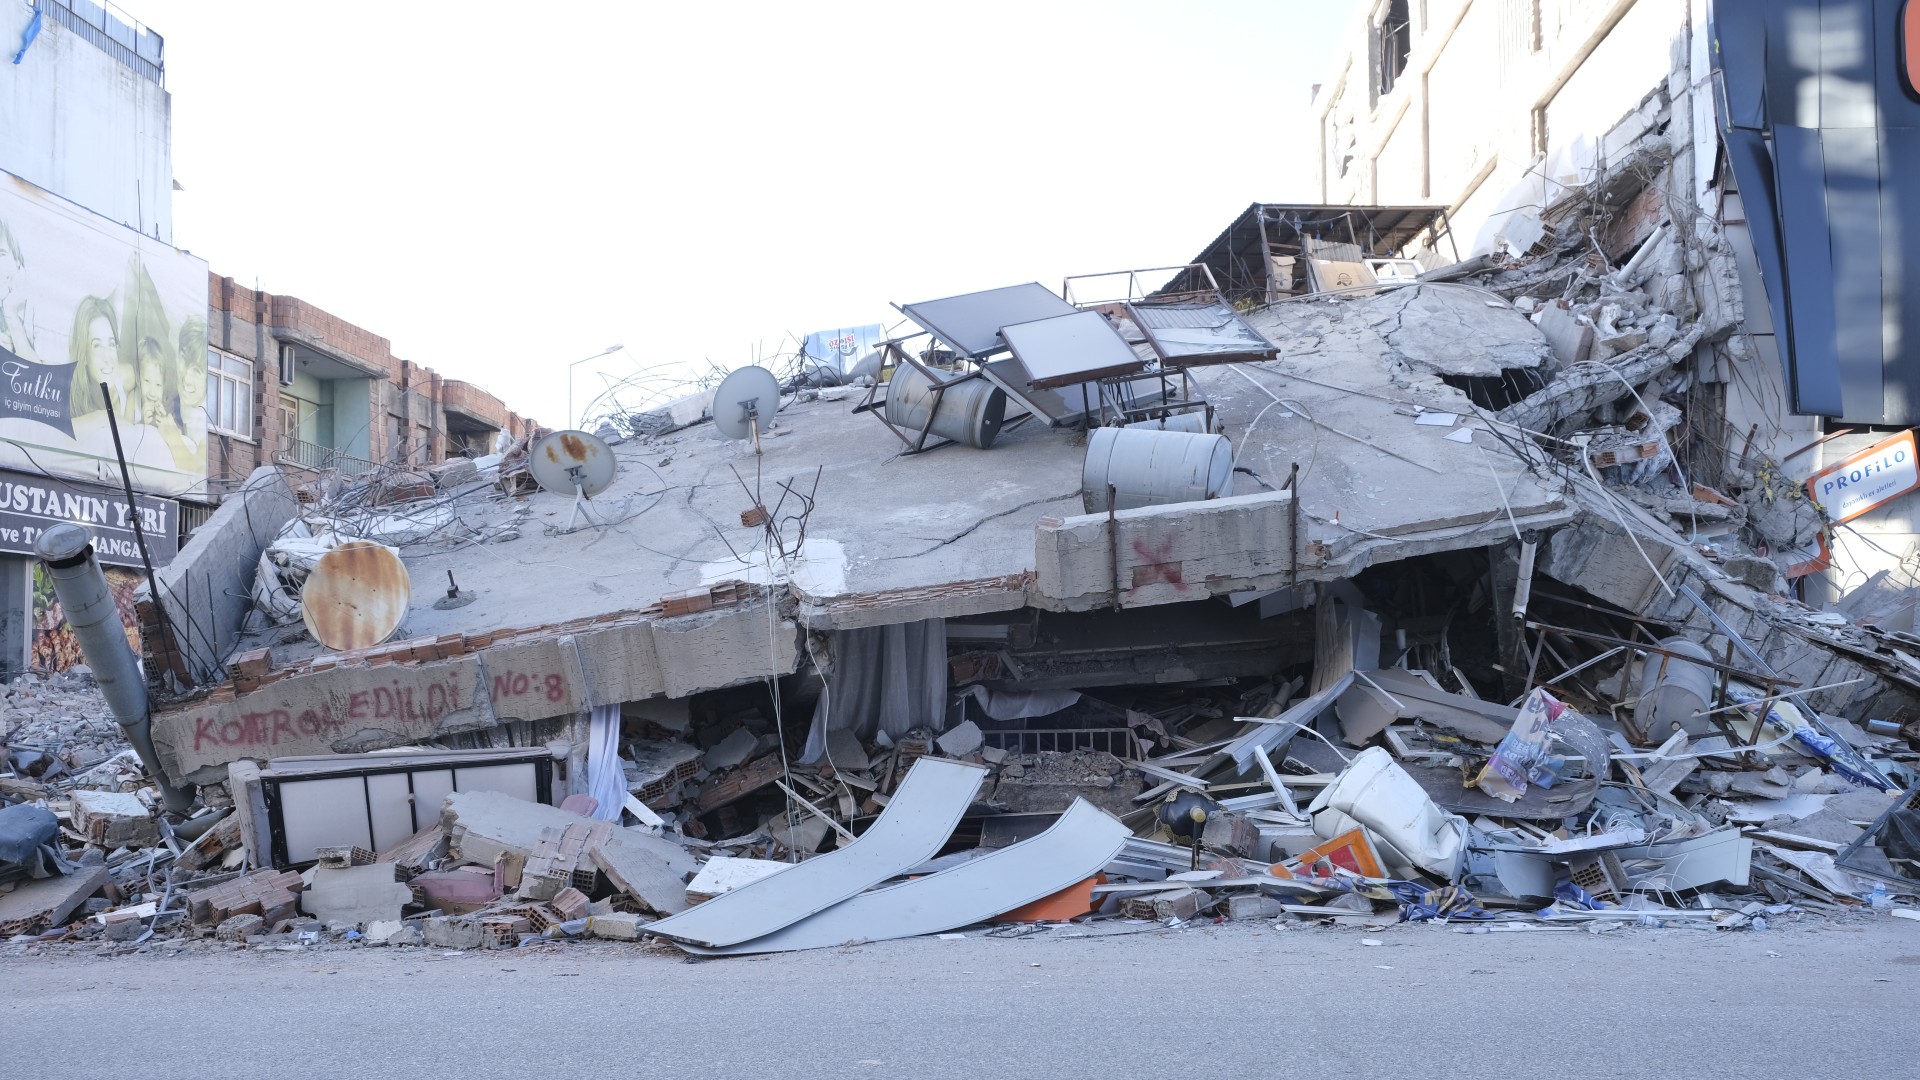 People walk on a street past a damaged building, after the 7.8-magnitude earthquake which struck parts of Turkey and Syria, in Adiyaman on 15 February 2023 (MEE/Ibrahim Gokhan Altindirek)